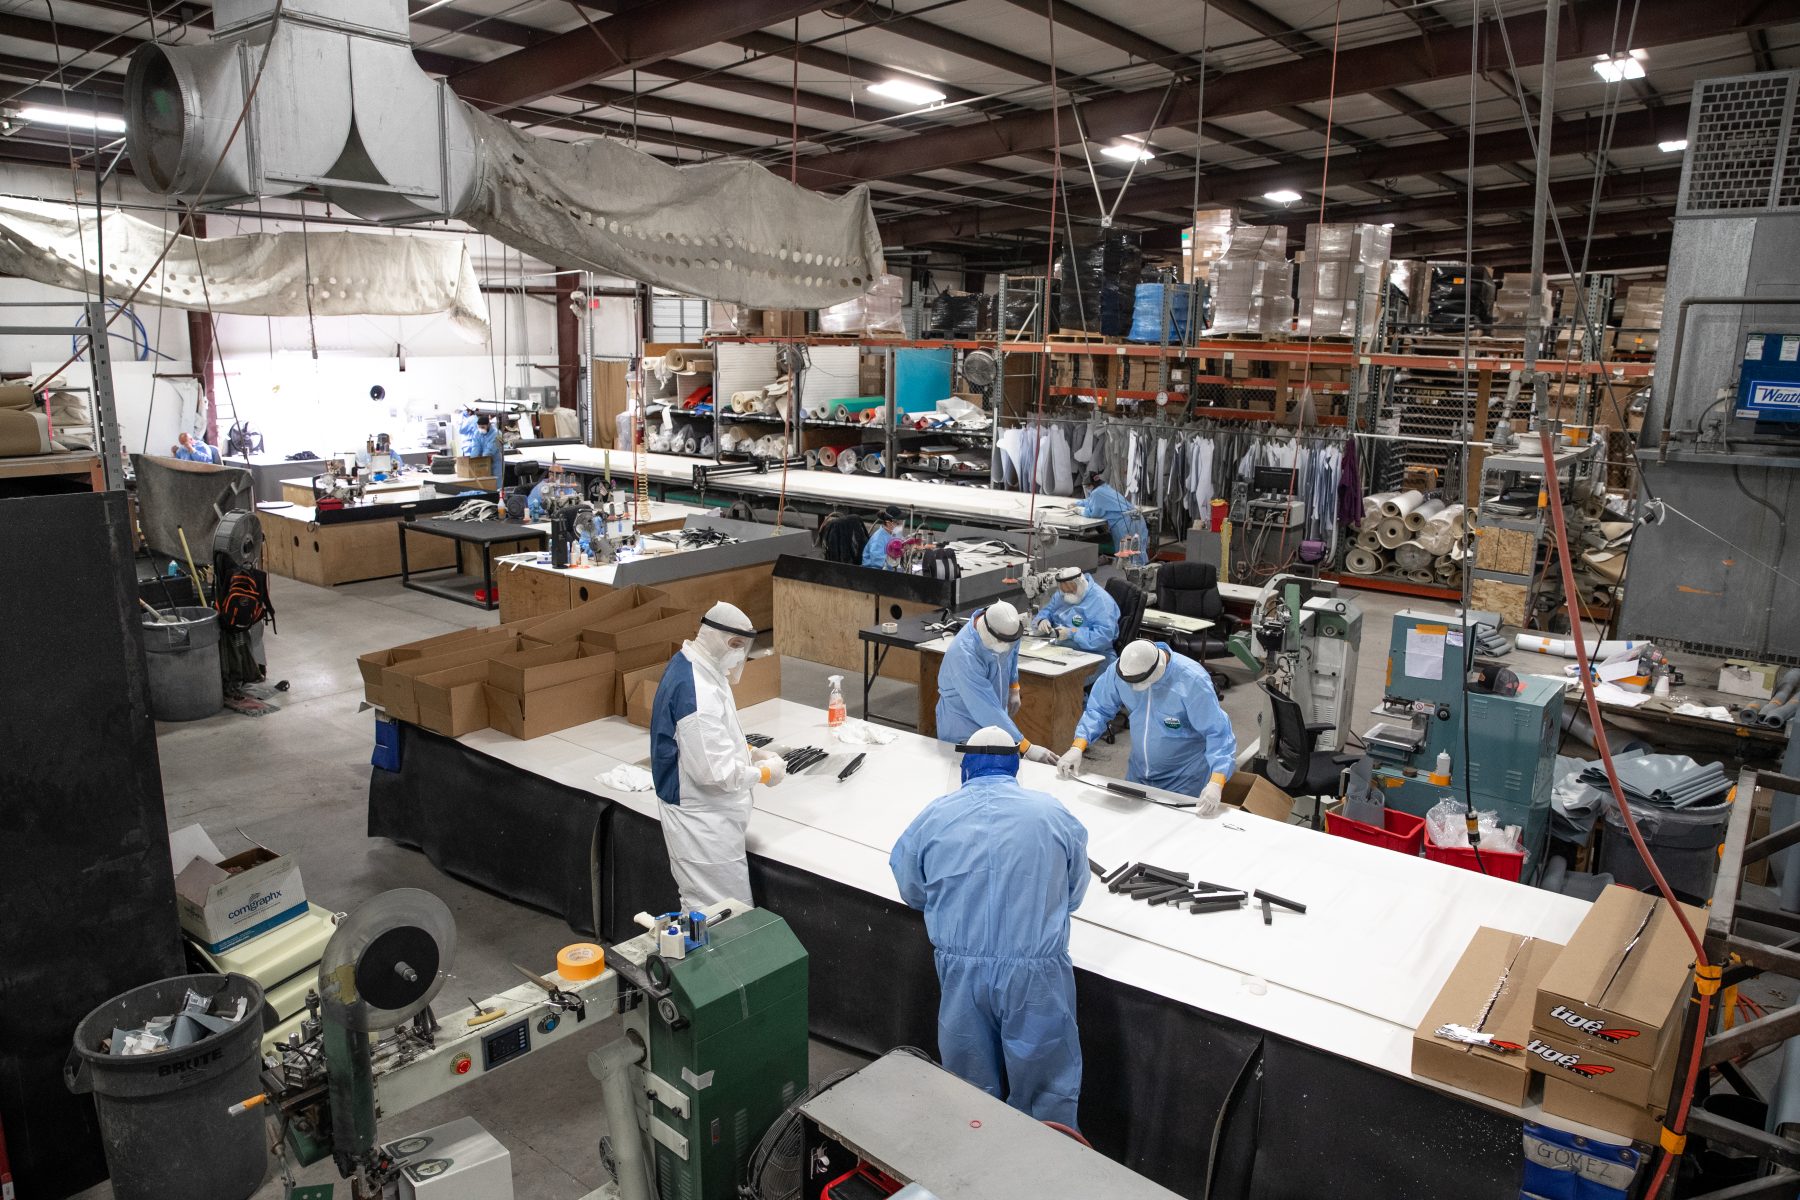 Tigé Boats in Abilene makes personal protective equipment in its factory. Photo courtesy Tigé Boats.